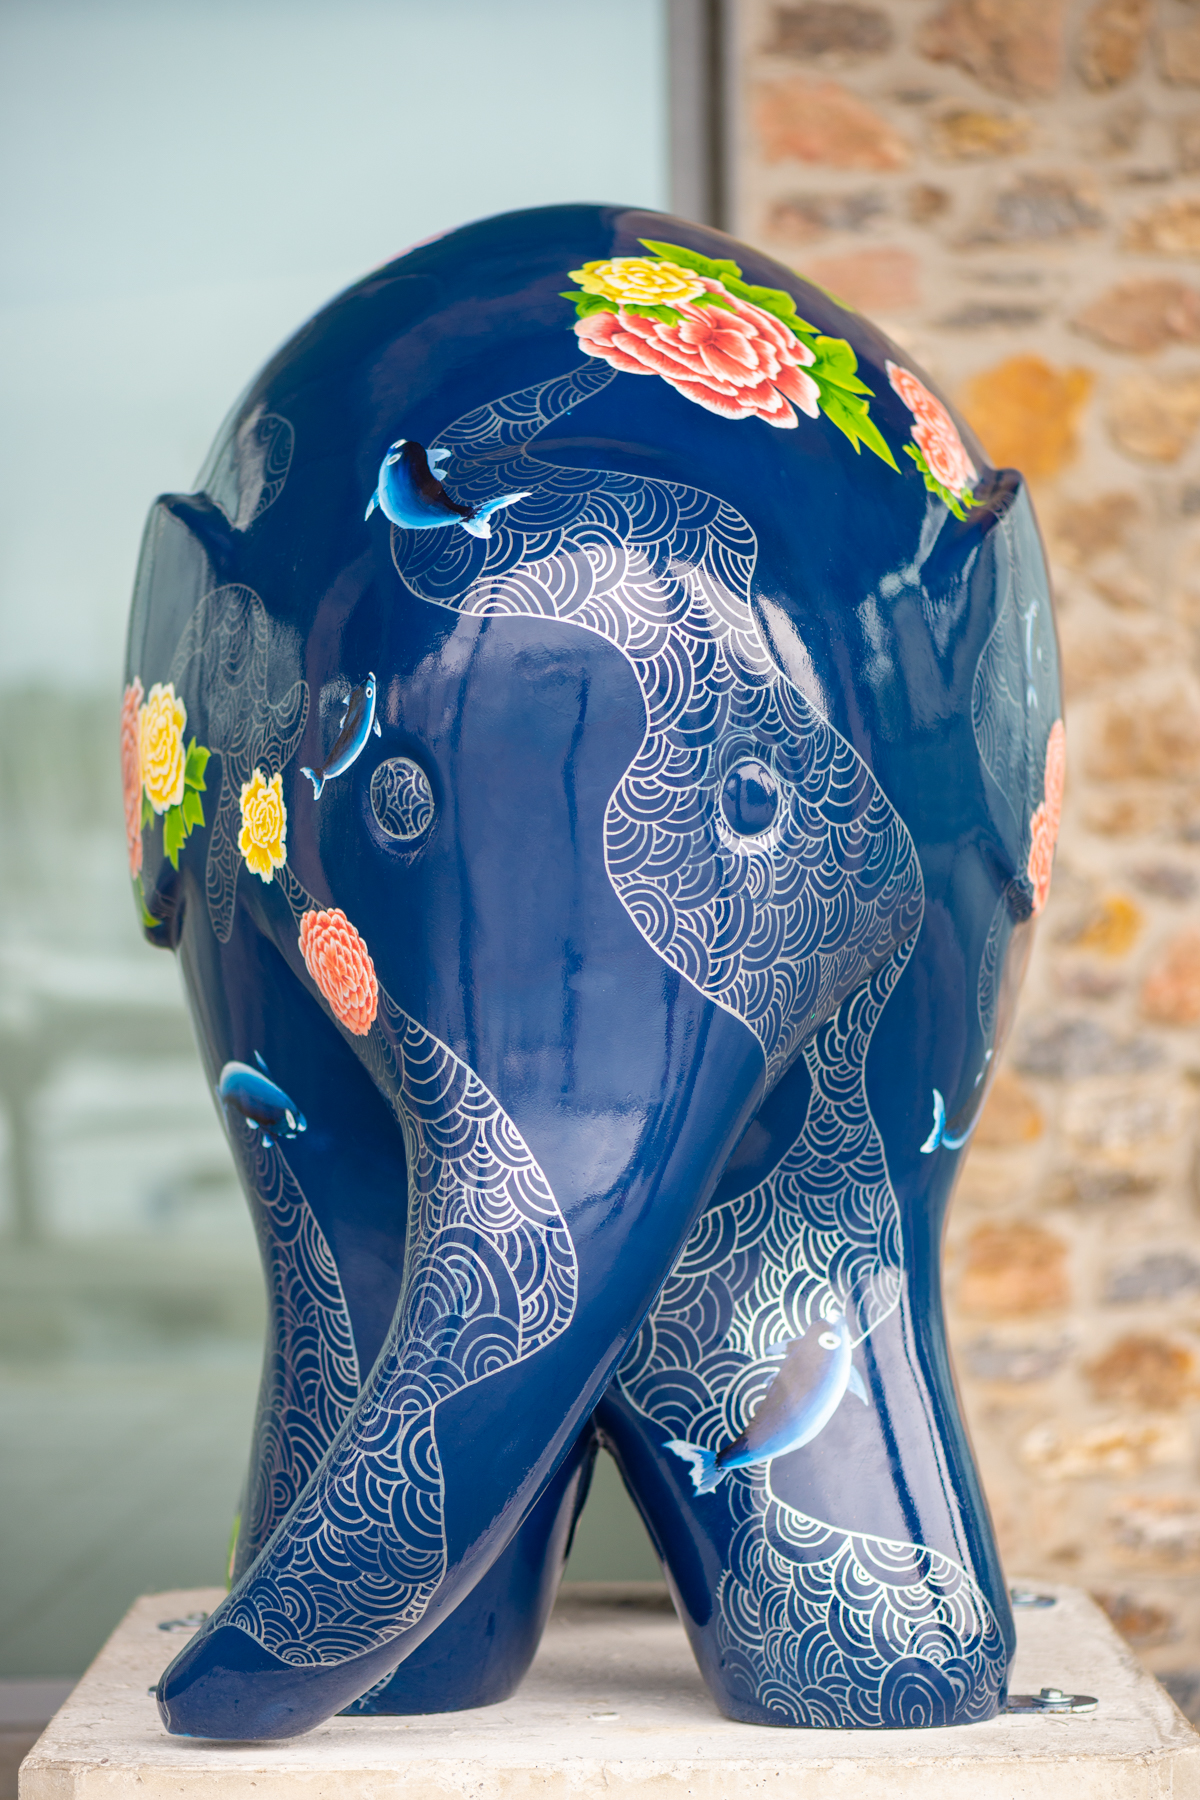 'Zou' by Jess Perrin. Sponsored by Foot Anstey - Image 16 of 16